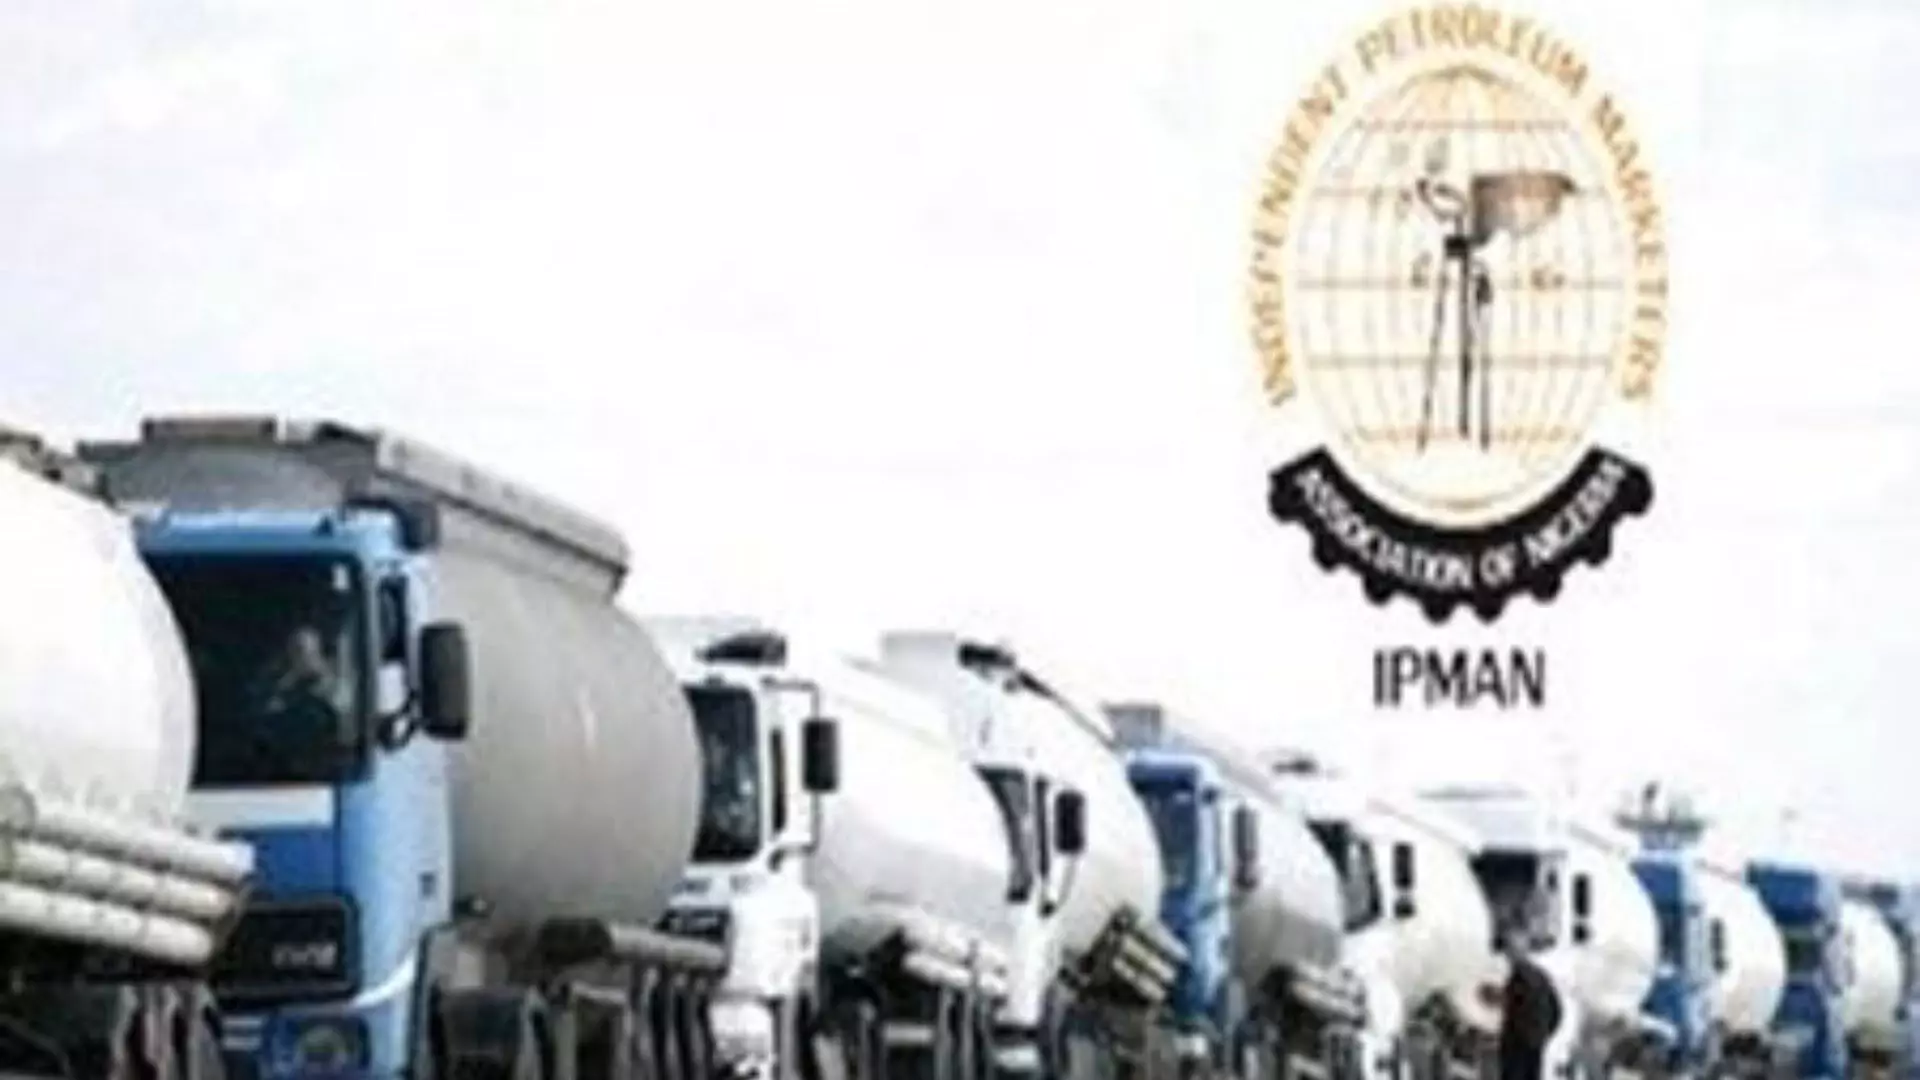 Breaking: IPMAN orders shutting down operations, fueling stations